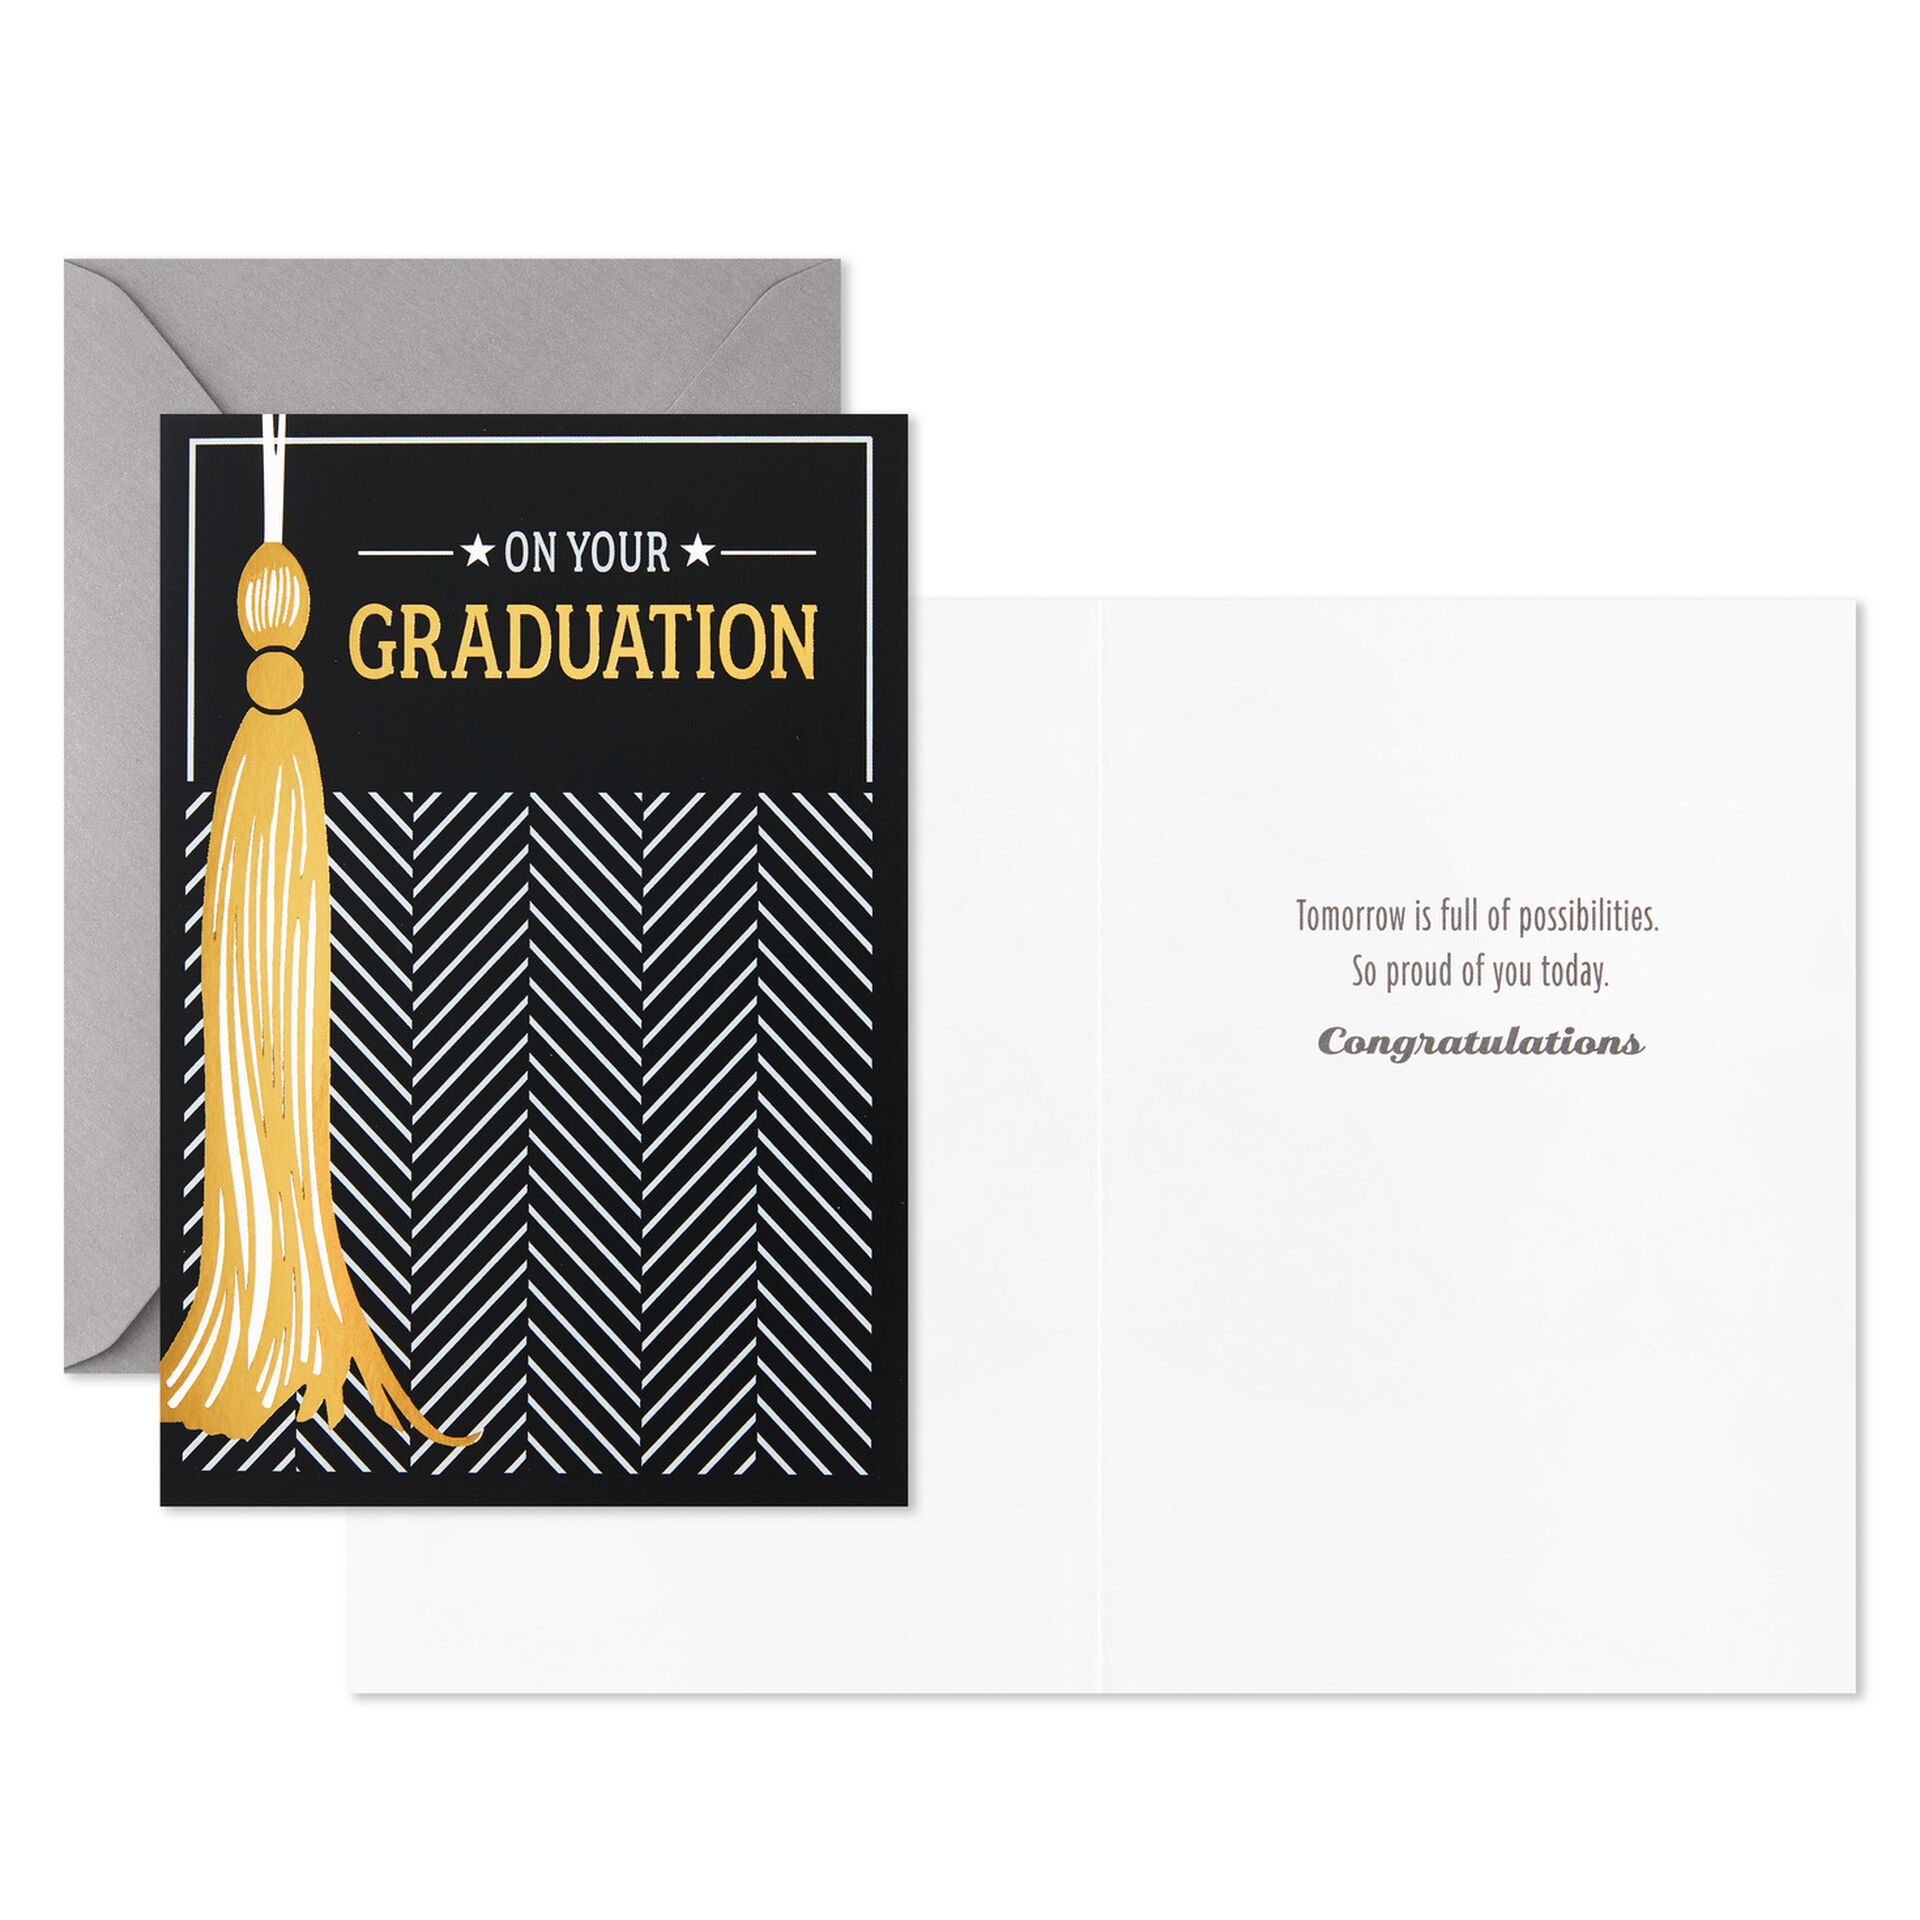 Assorted-Graduation-Cards-With-Gold-Foil-Bulk-Pack_5GEY2010_02